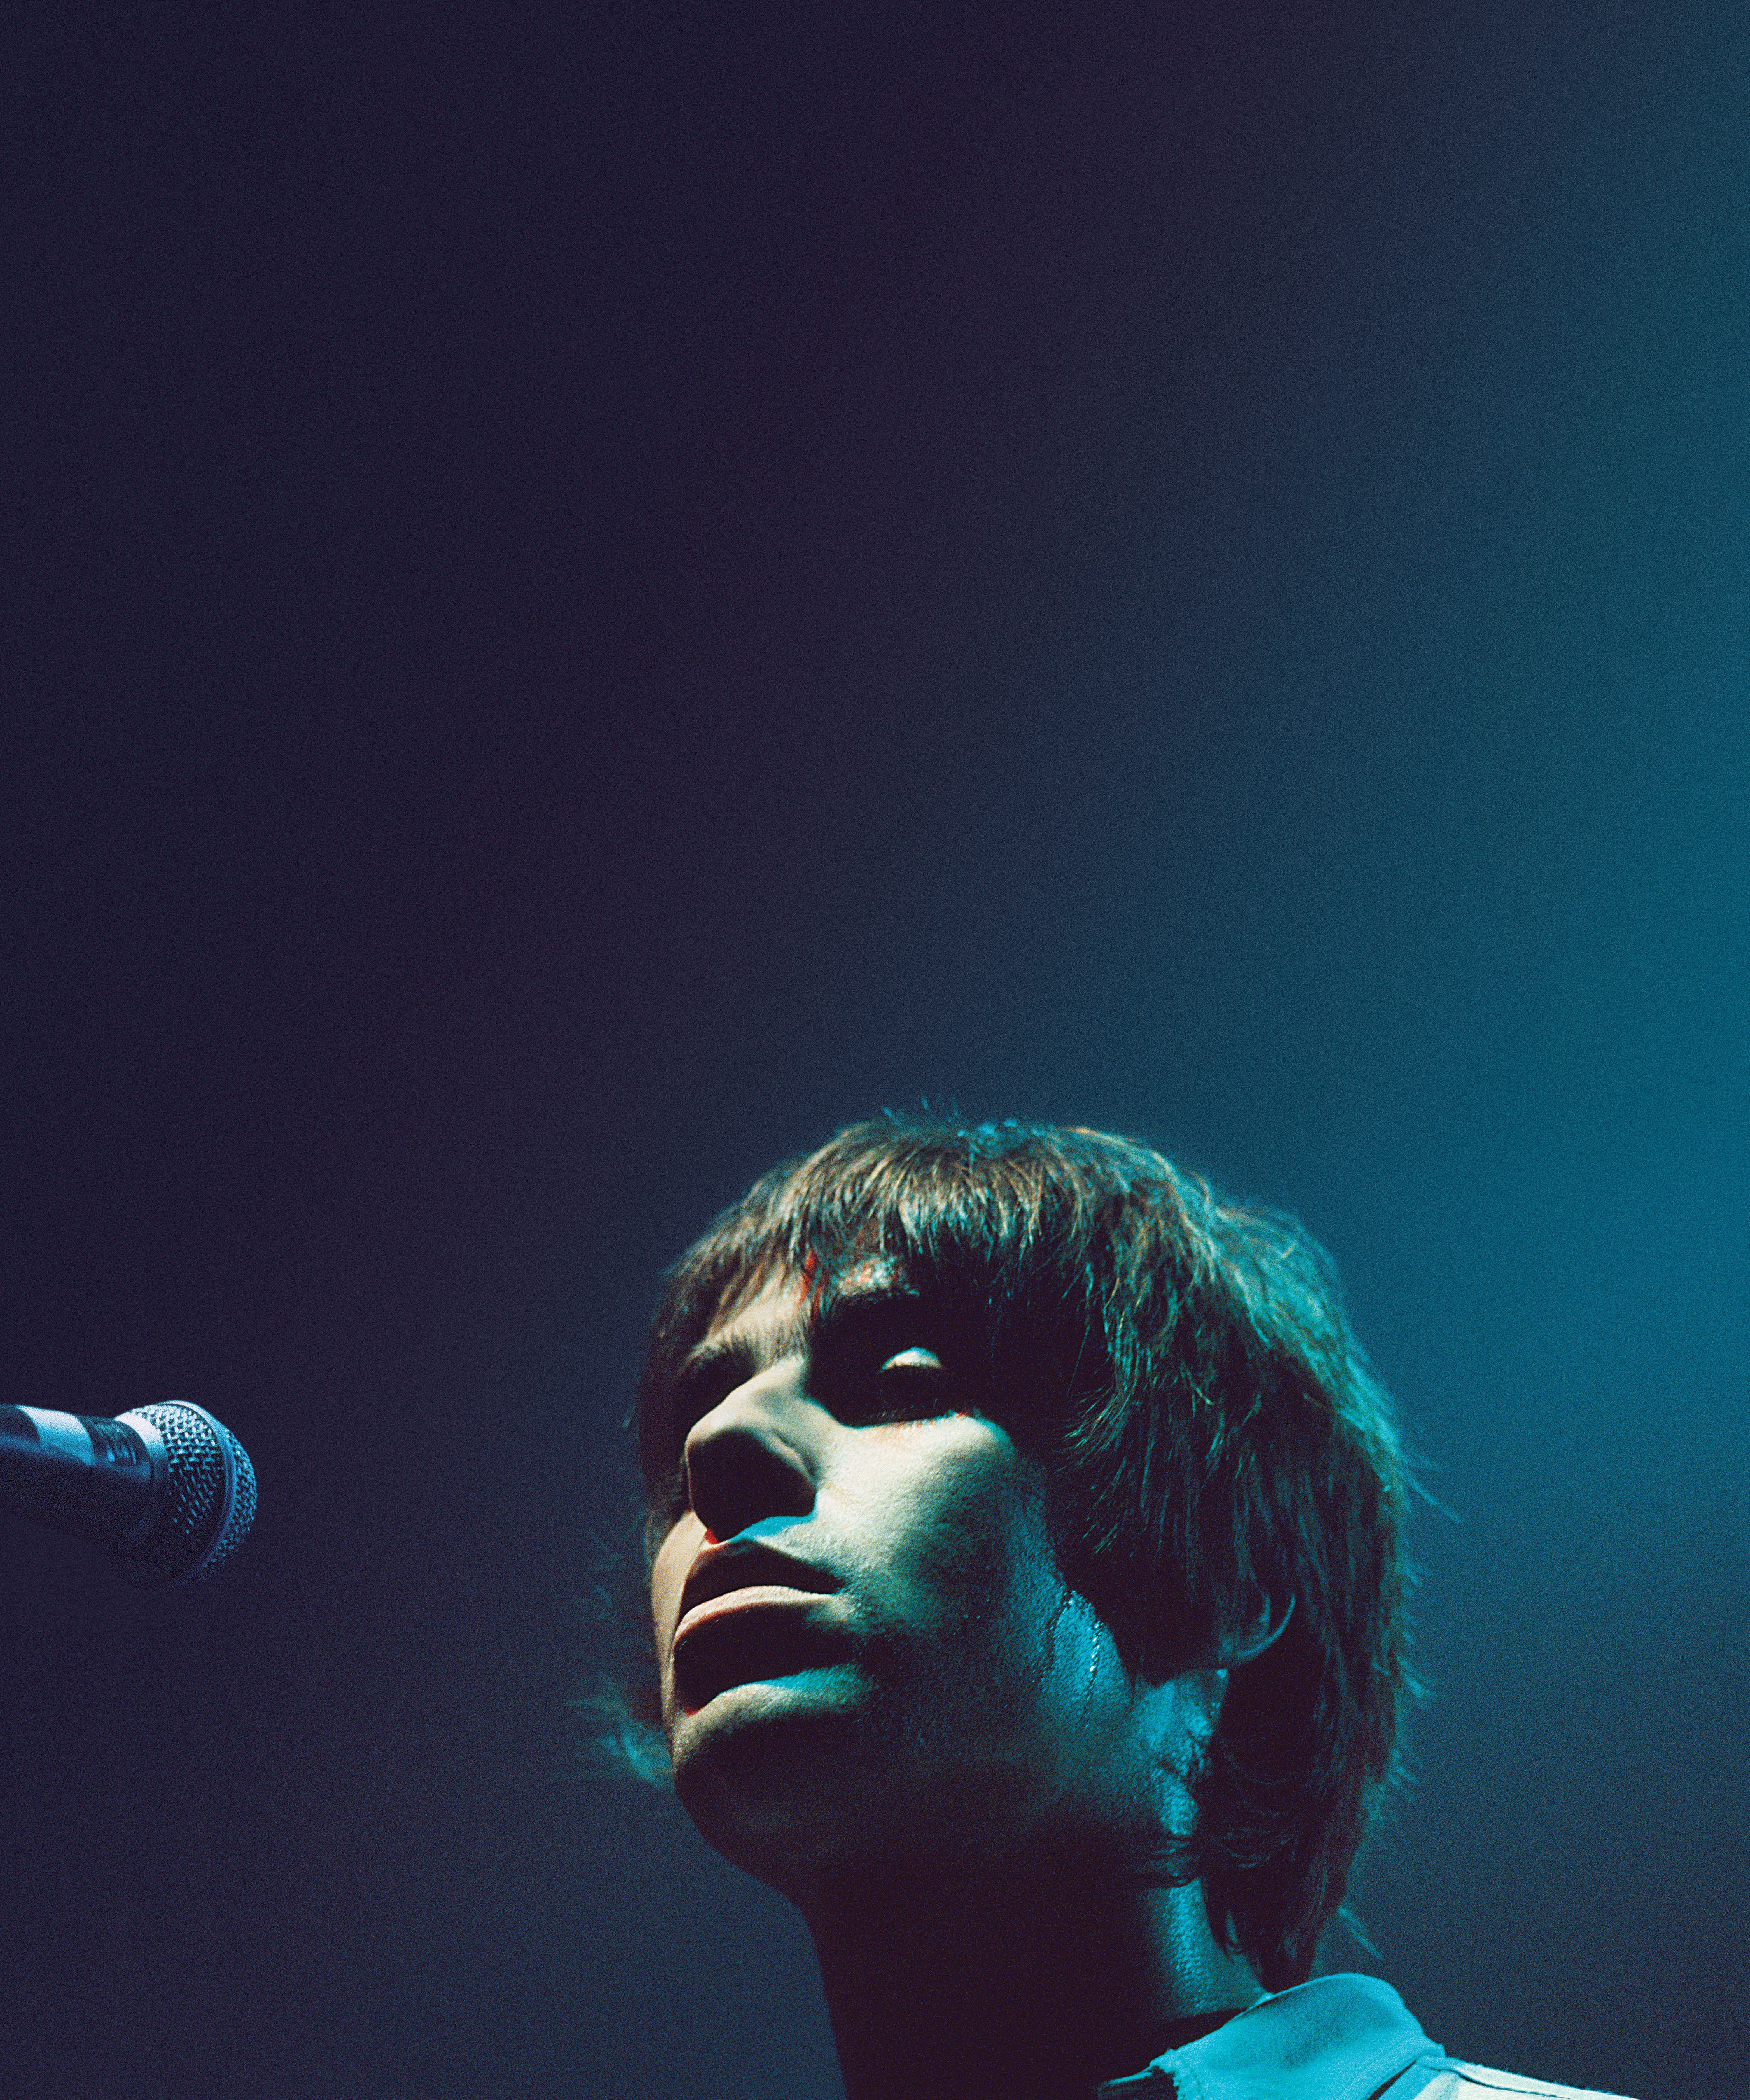 Liam Gallagher - Definitely Maybe 30 Years in Dublin promo photo for 3 Venue presale offer code